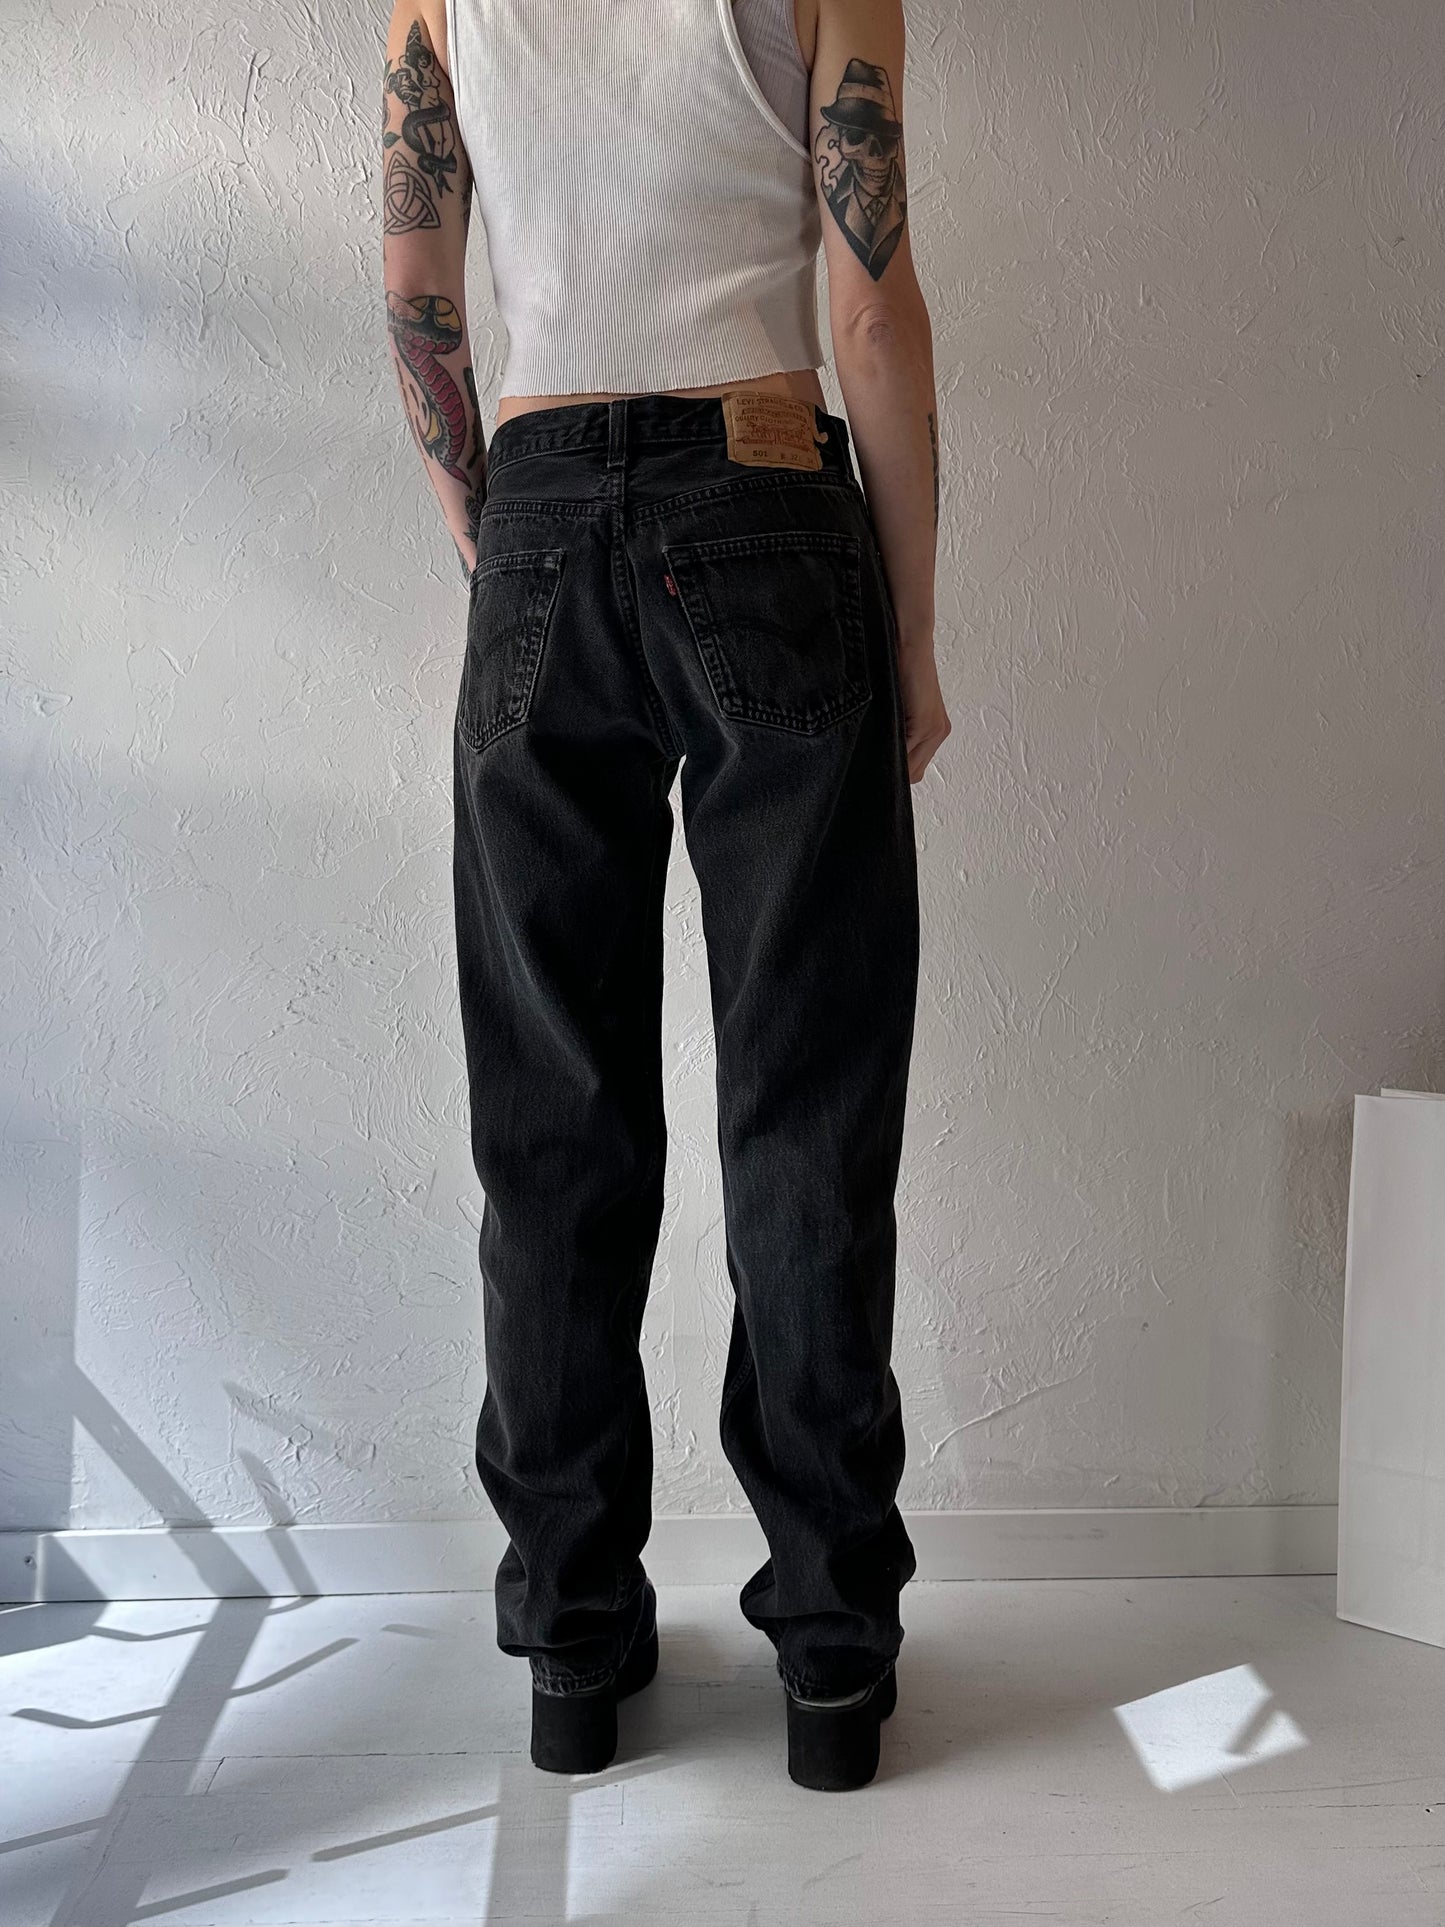 90s 'Levis' 501 Dark Wash Jeans / Made in Canada / 31"